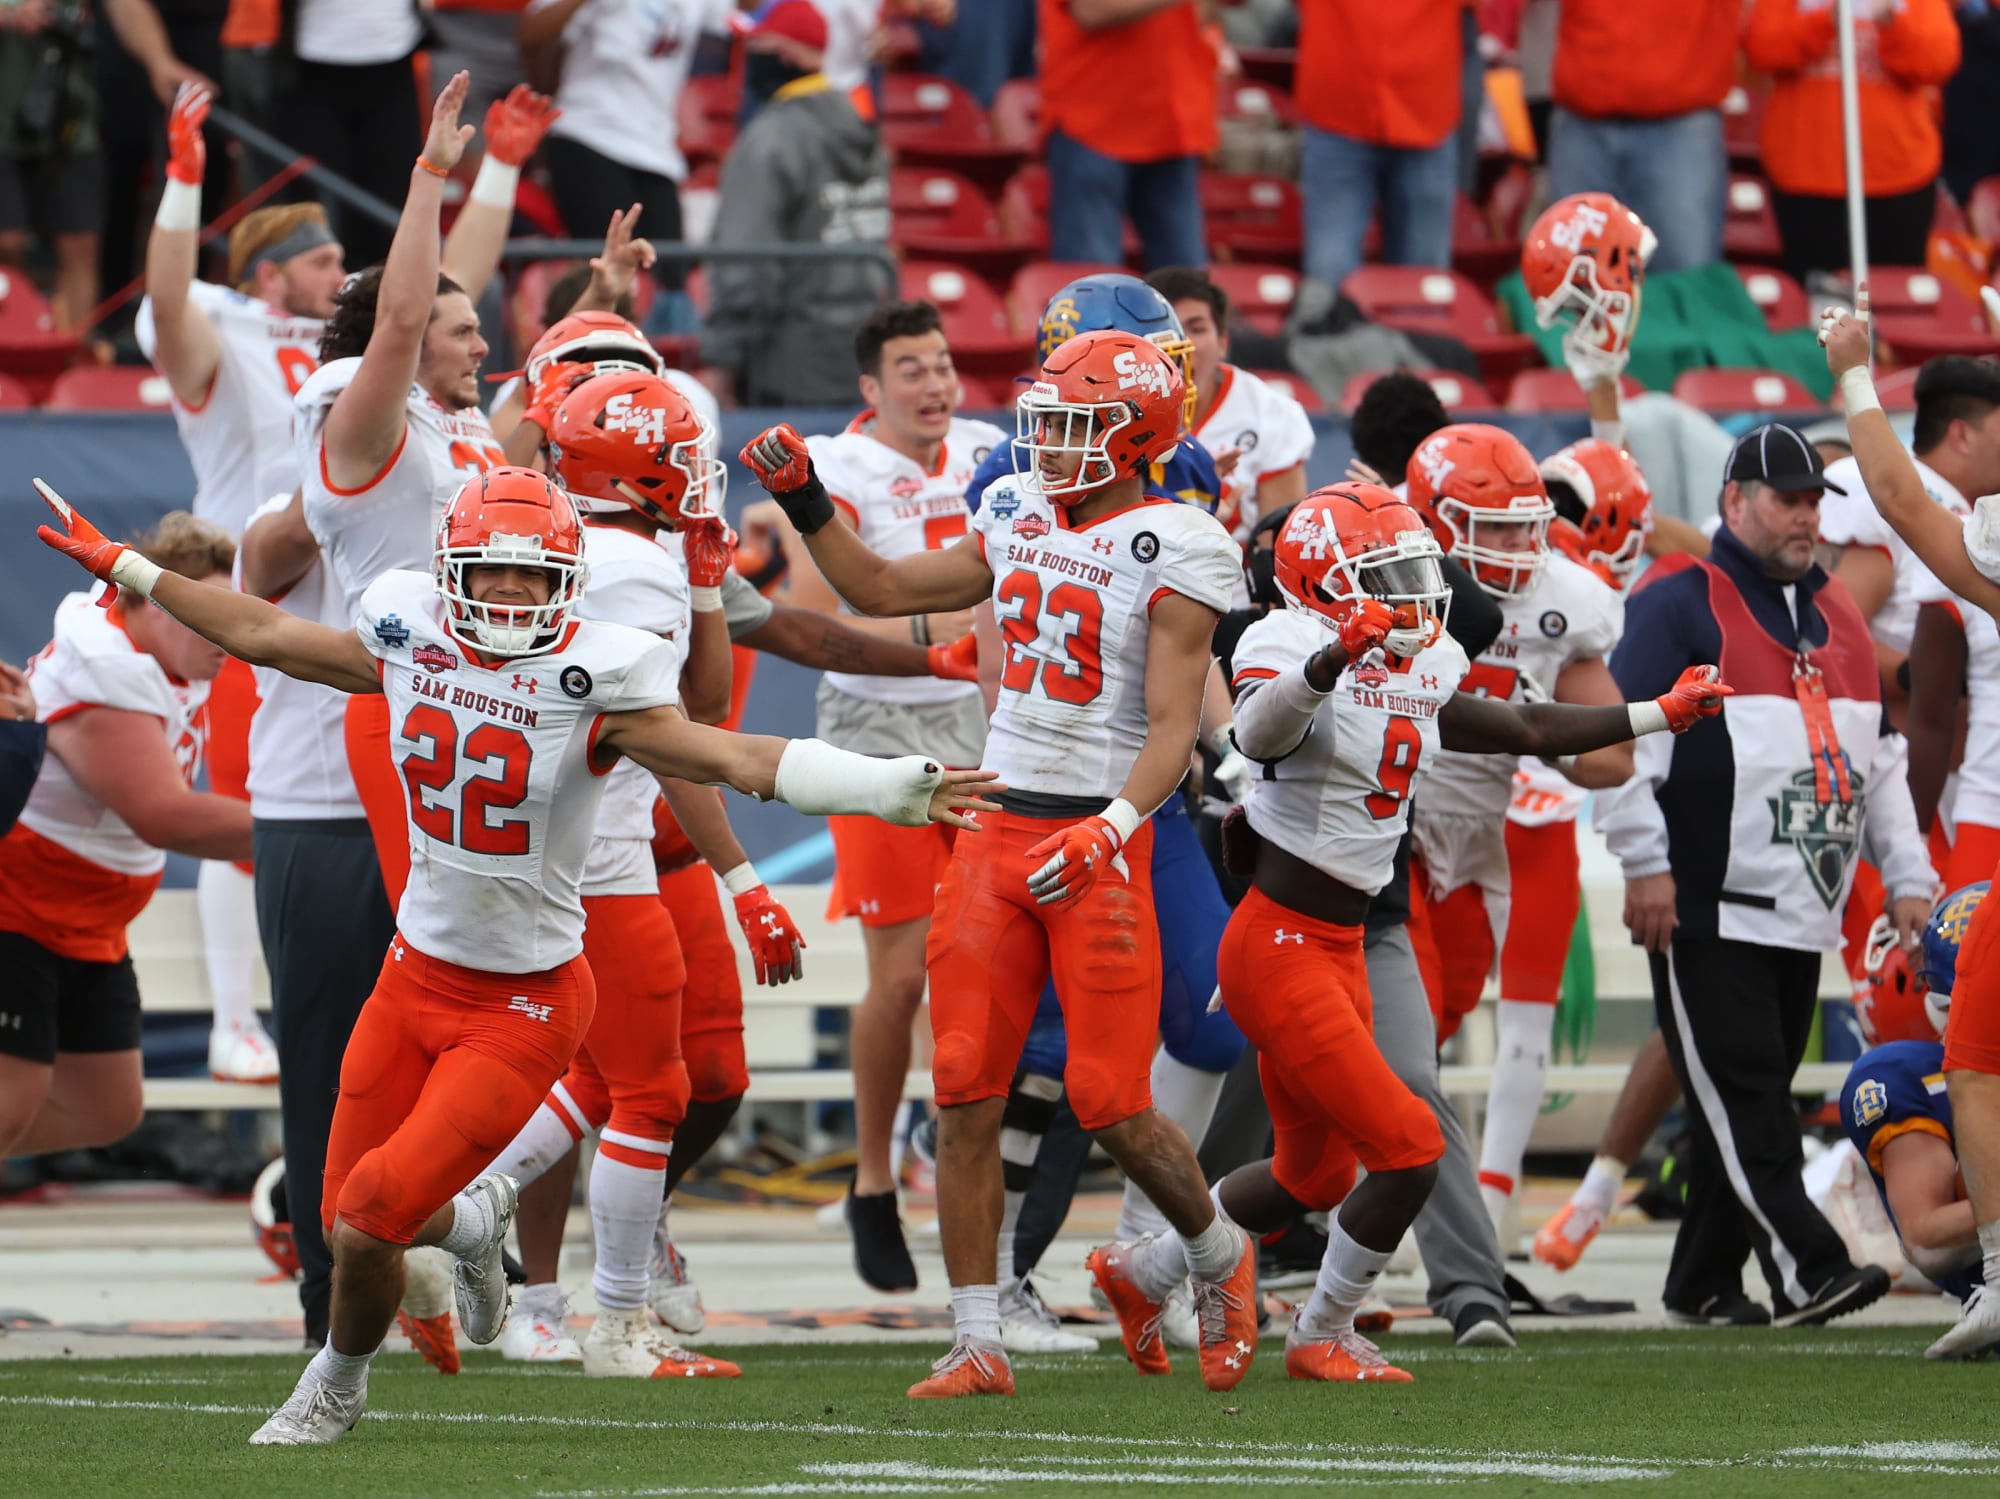 Sam Houston State captures first ever FCS Football National